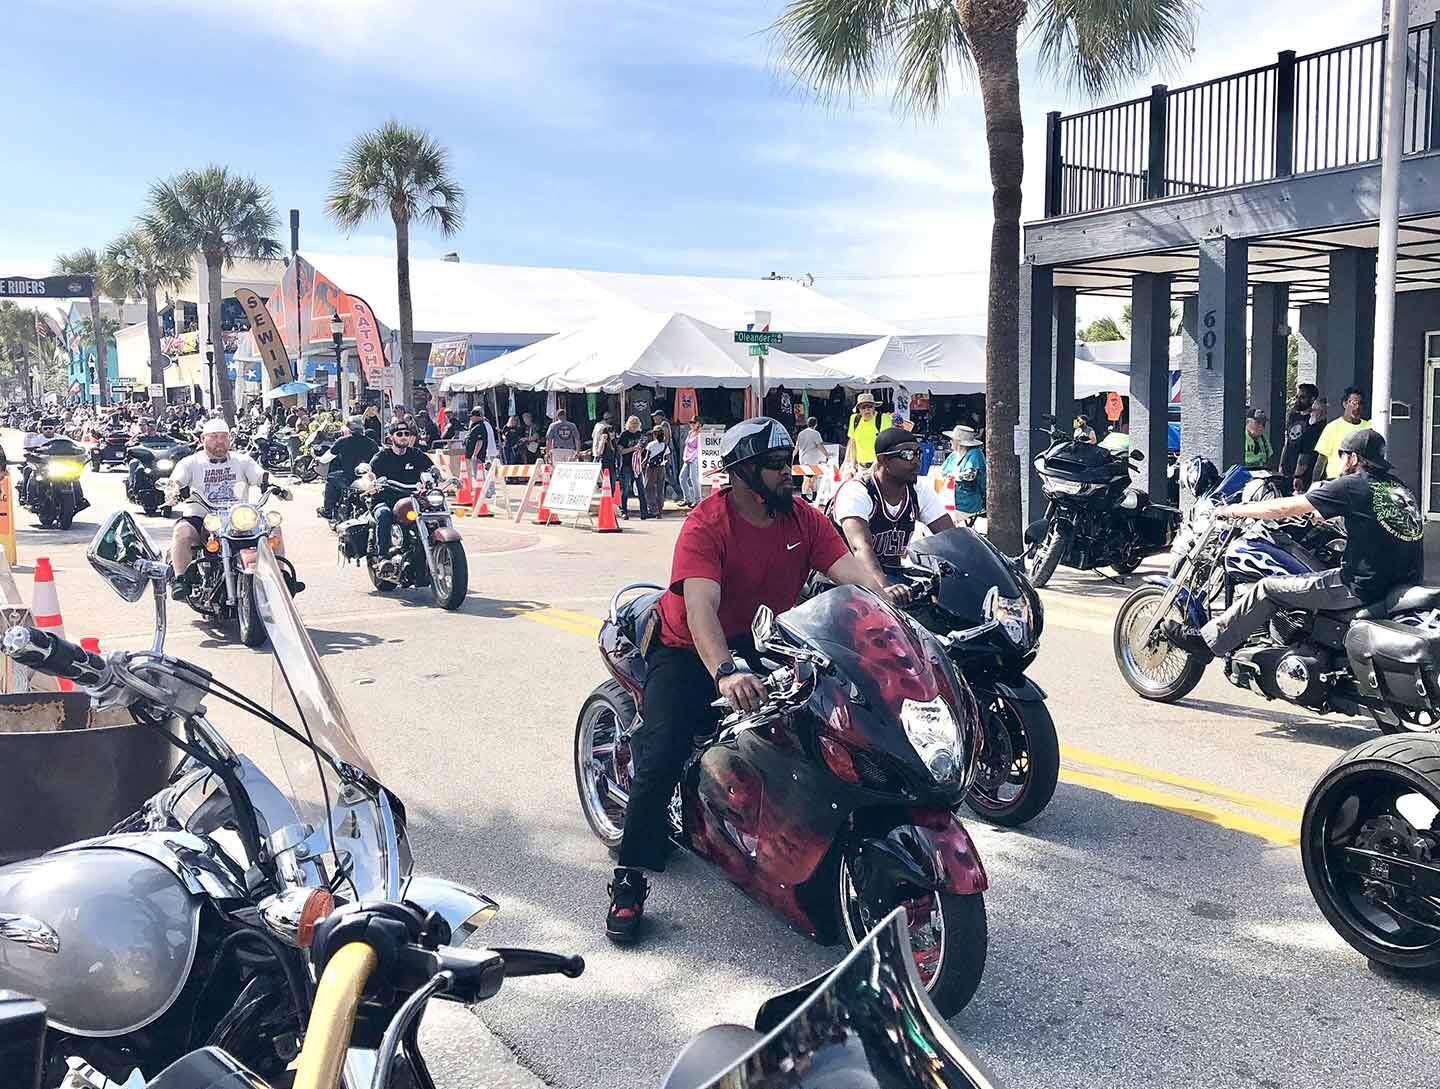 Japanese sportbikes, American V-twins, Canadian trikes—you saw them all cruising down Main Street.